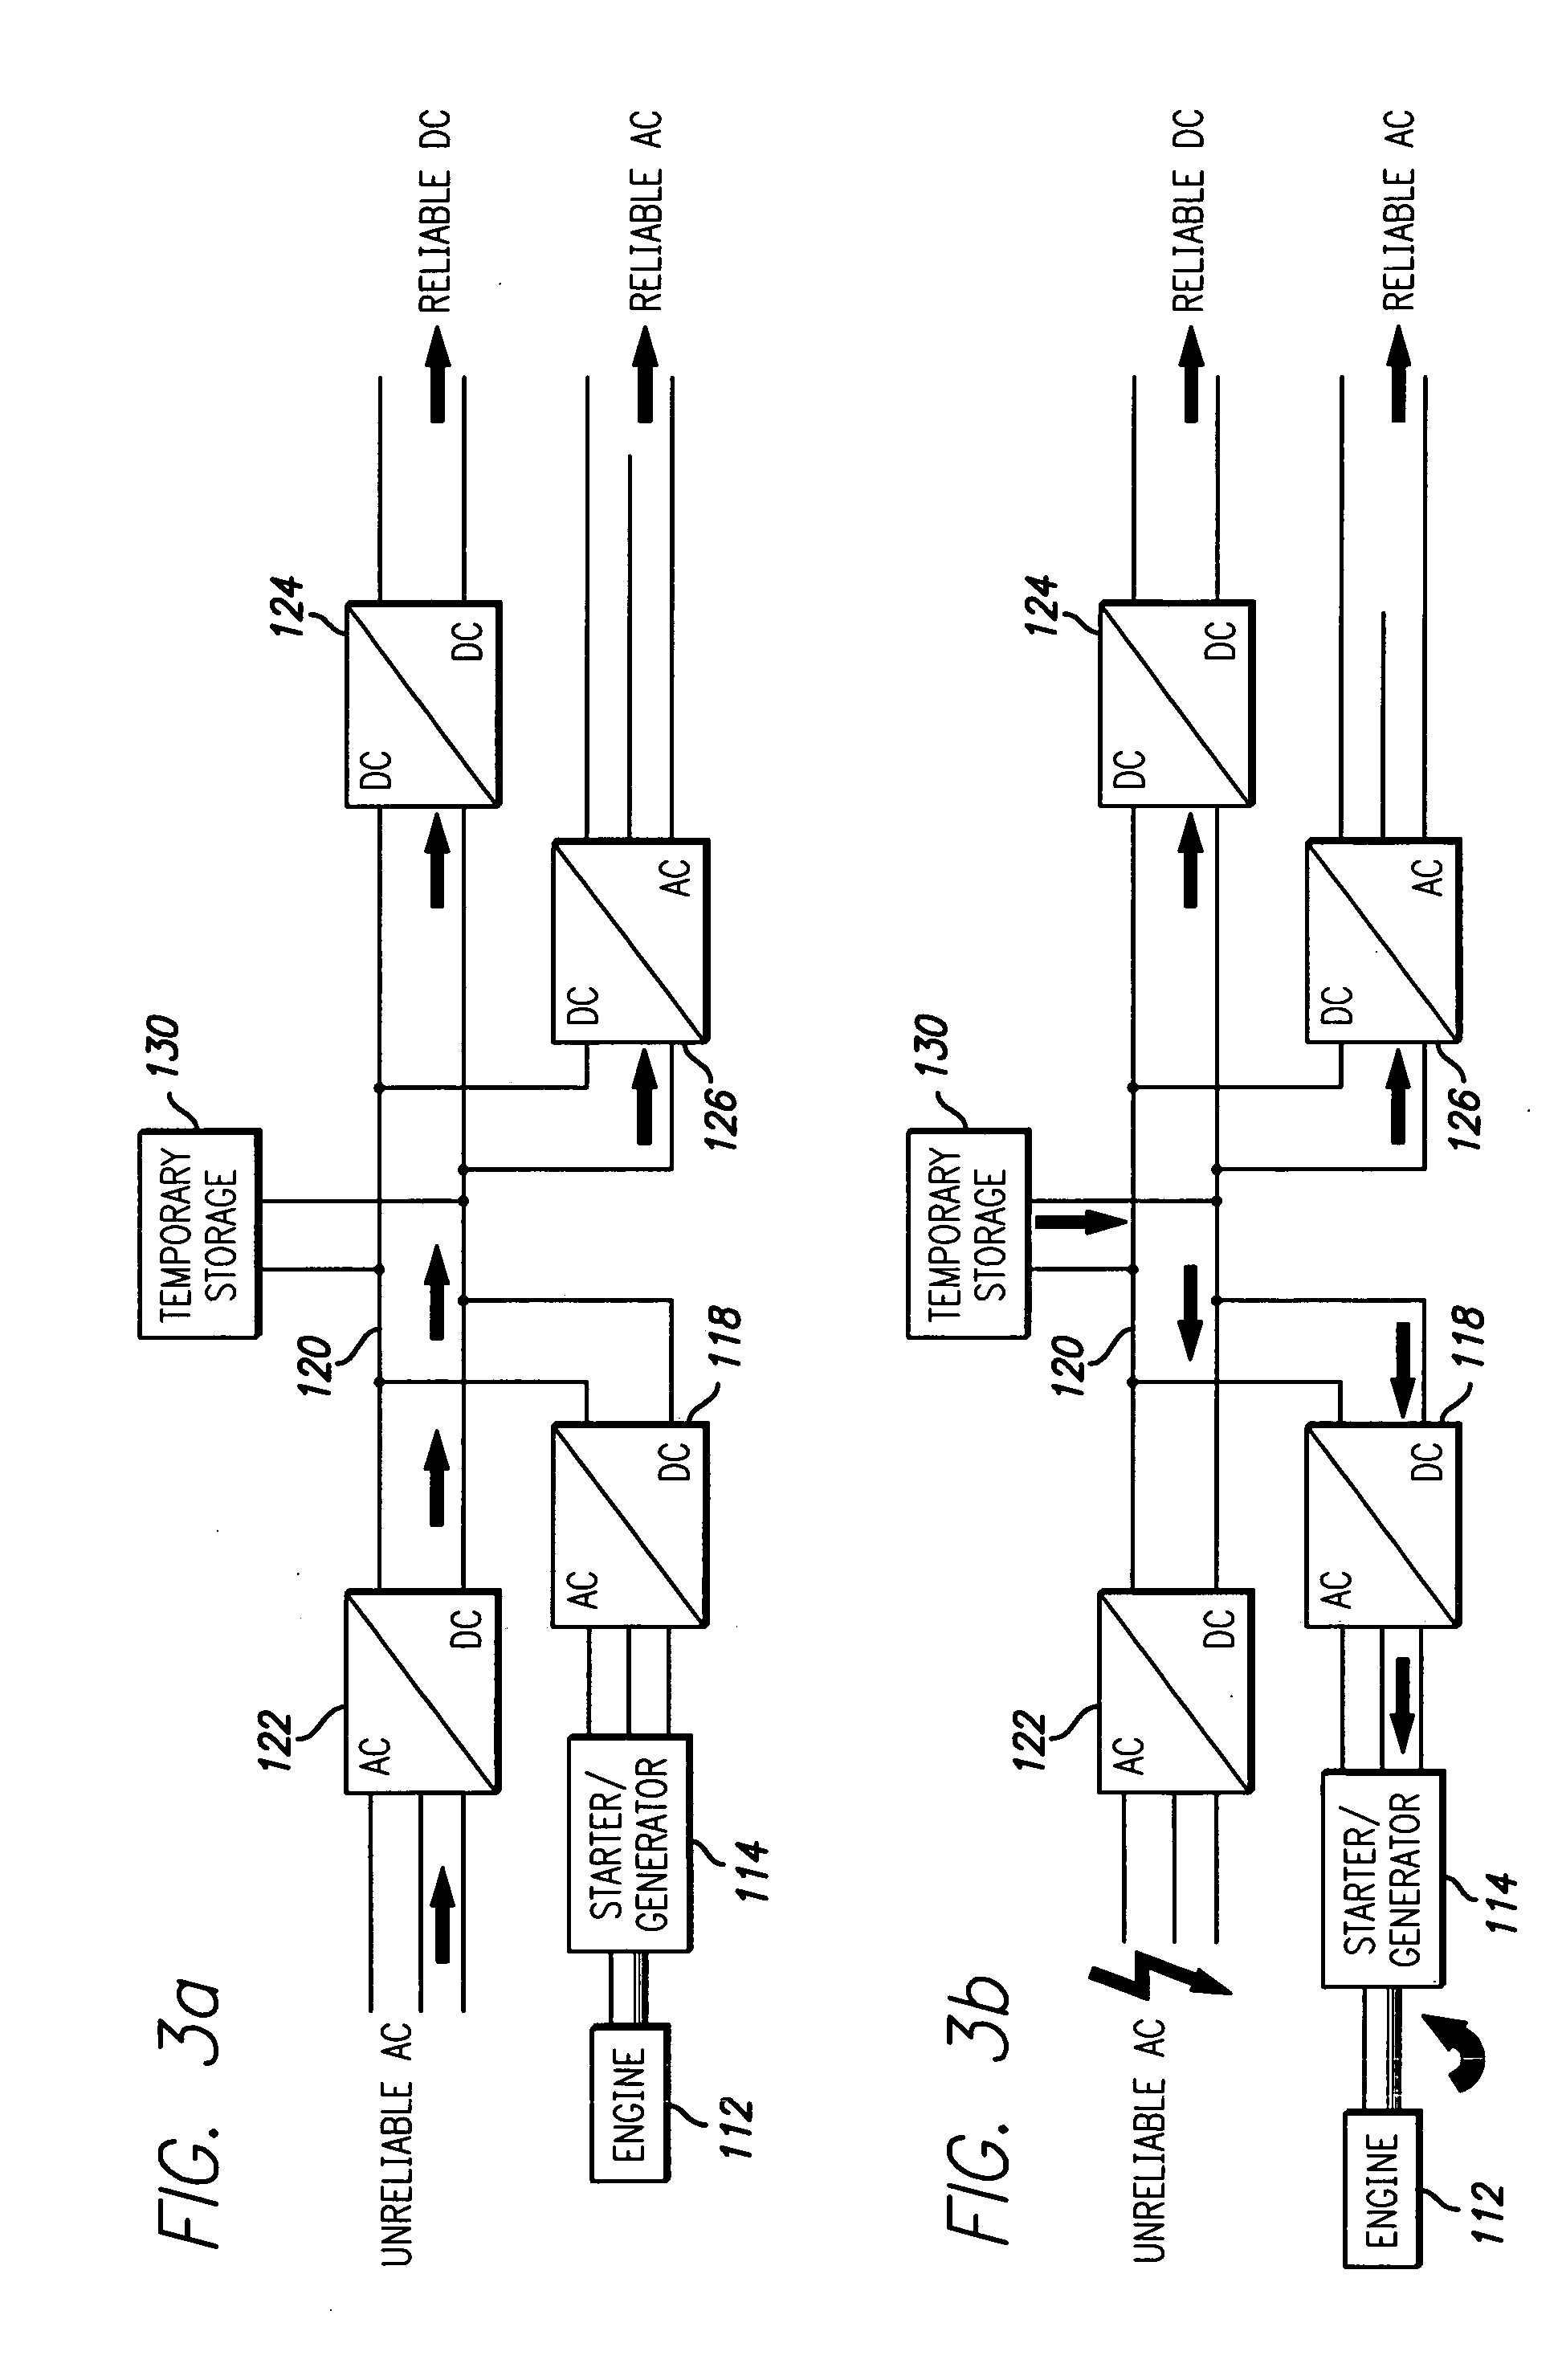 Distributed power generation, conversion, and storage system